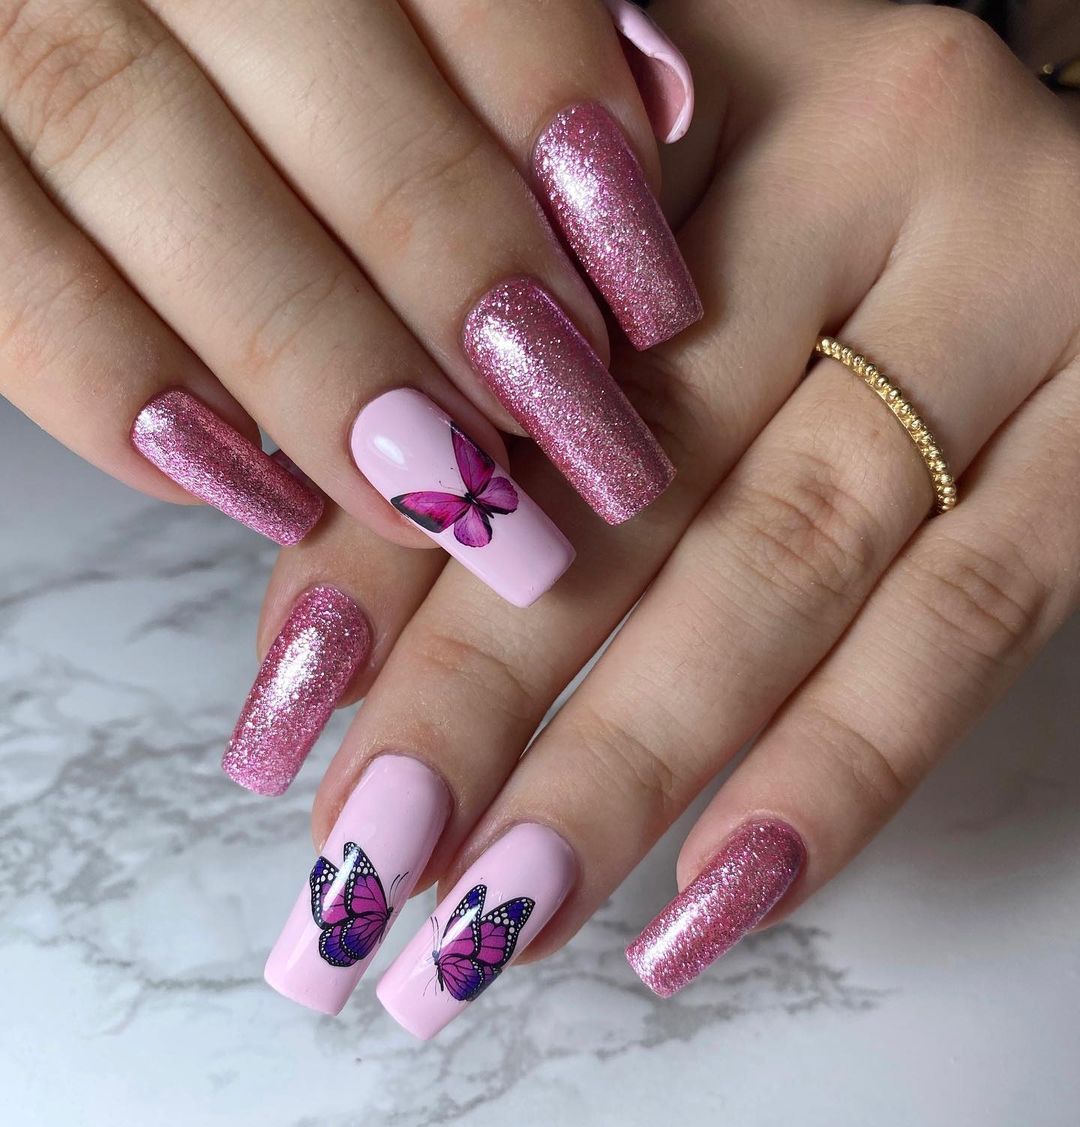 Pink butterflies are quite aesthetic, aren't they? If you agree with us, you can put some flying butterflies on your pink based look.